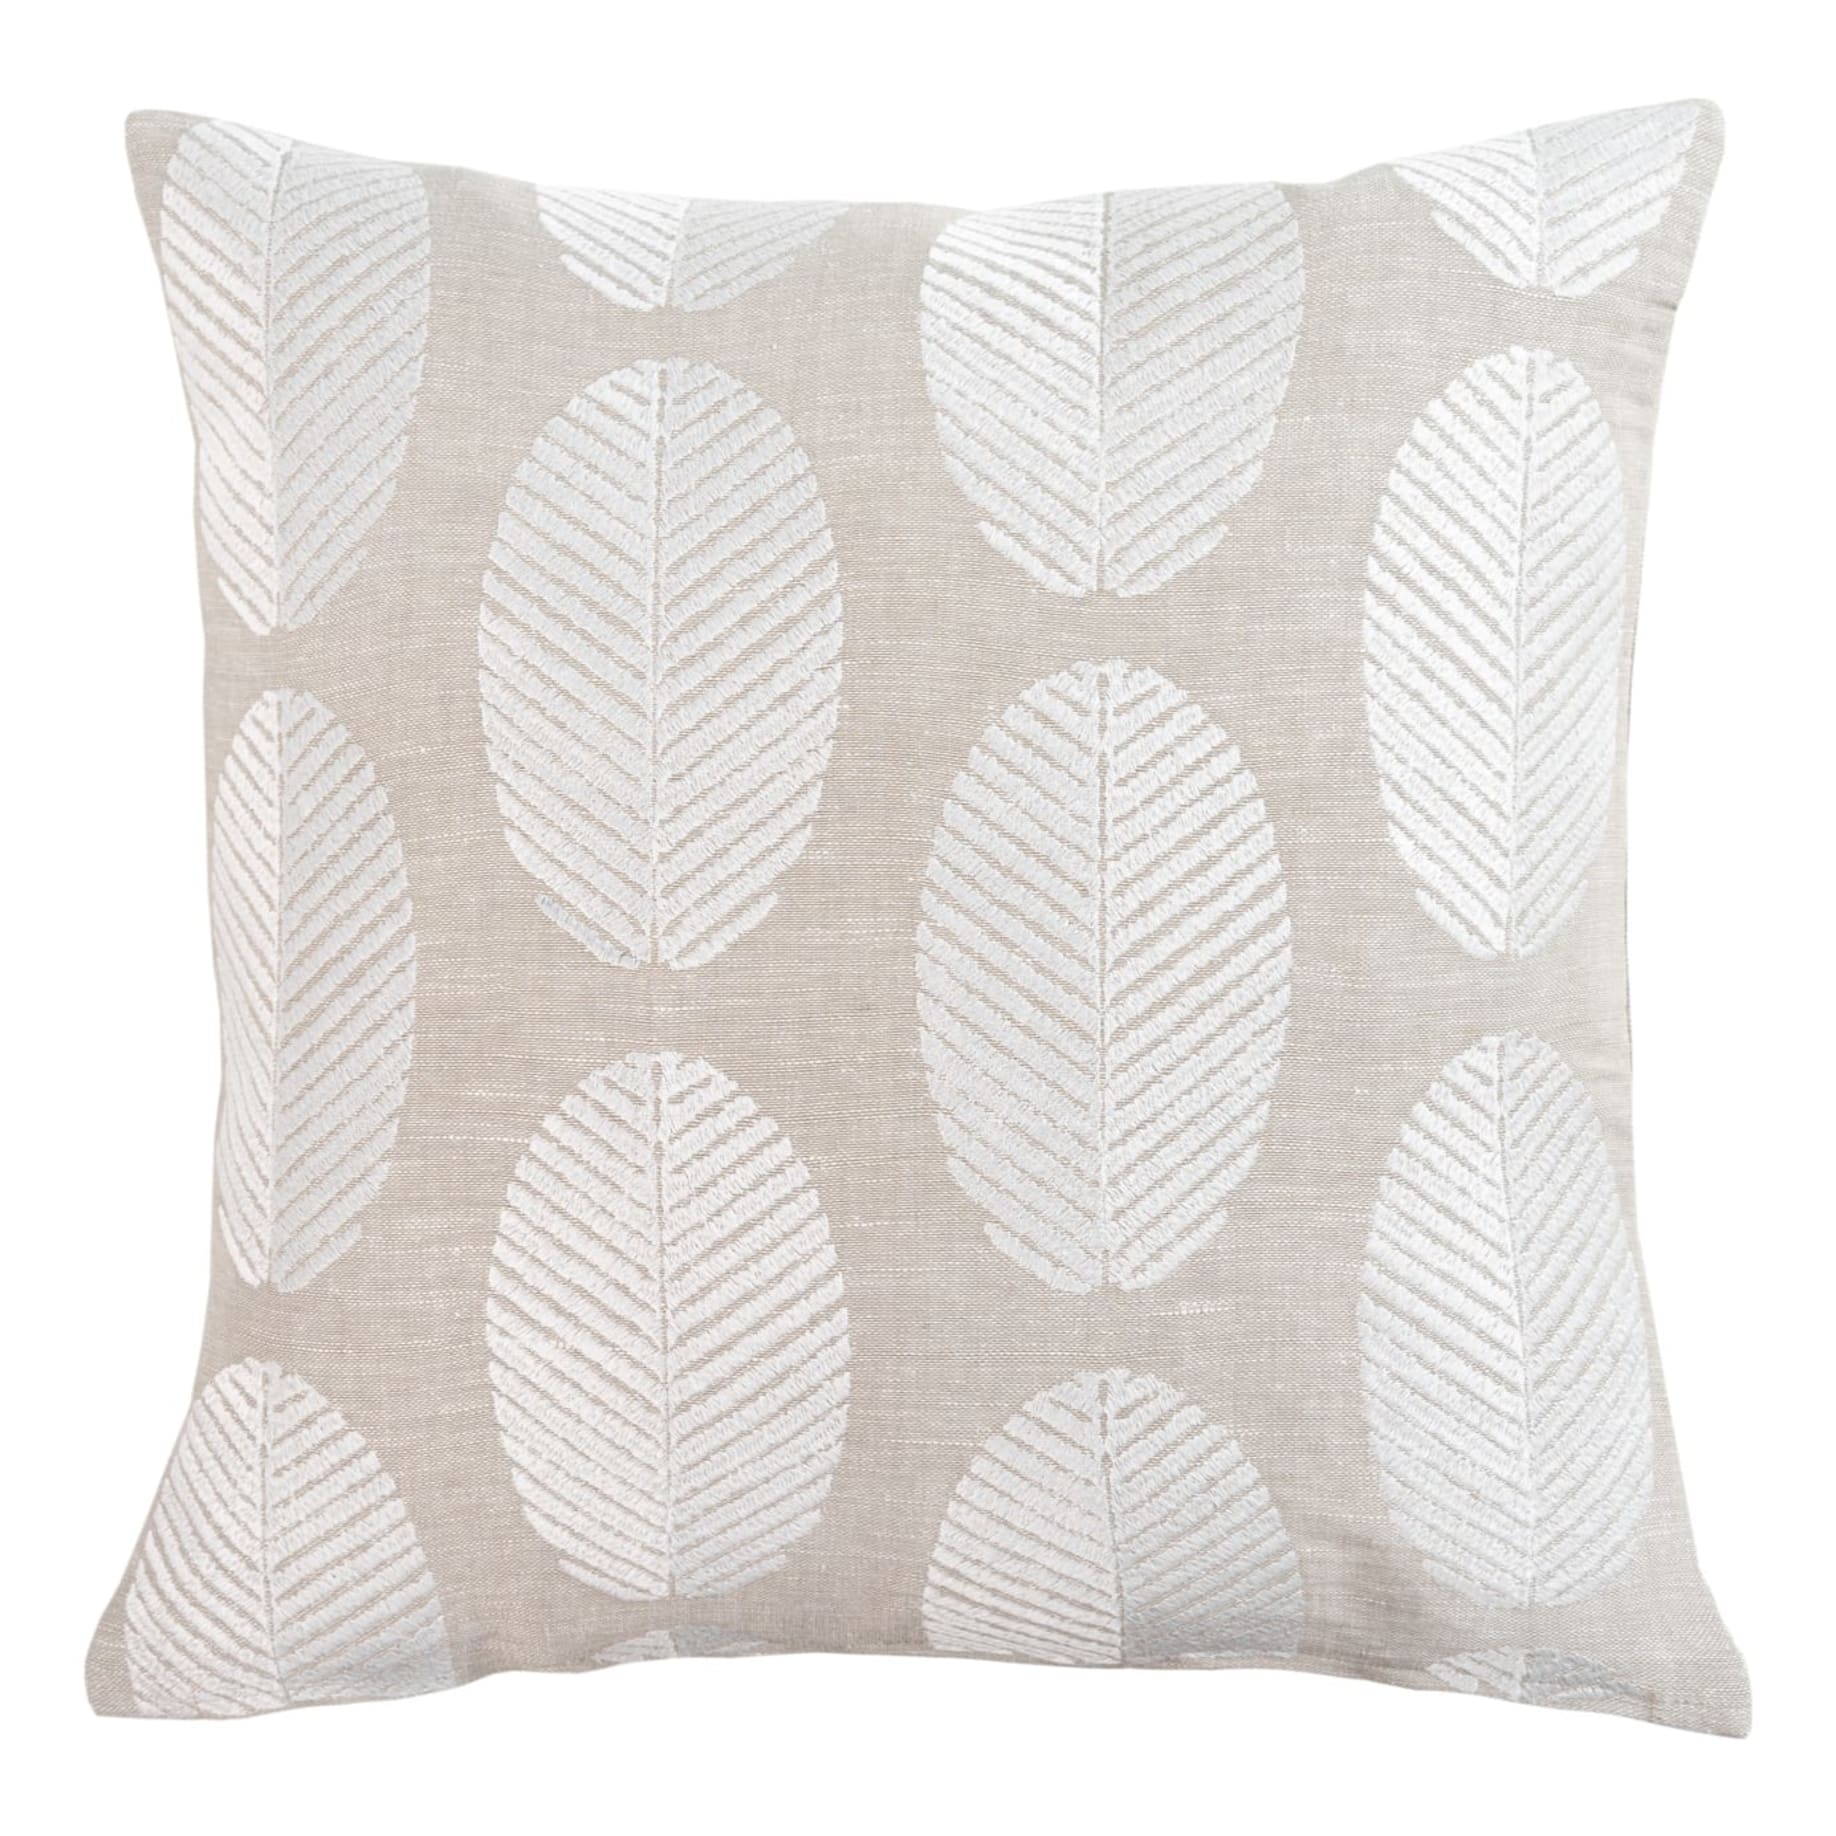 Vermont Feather Fill Cushion 50x50cm in Milk